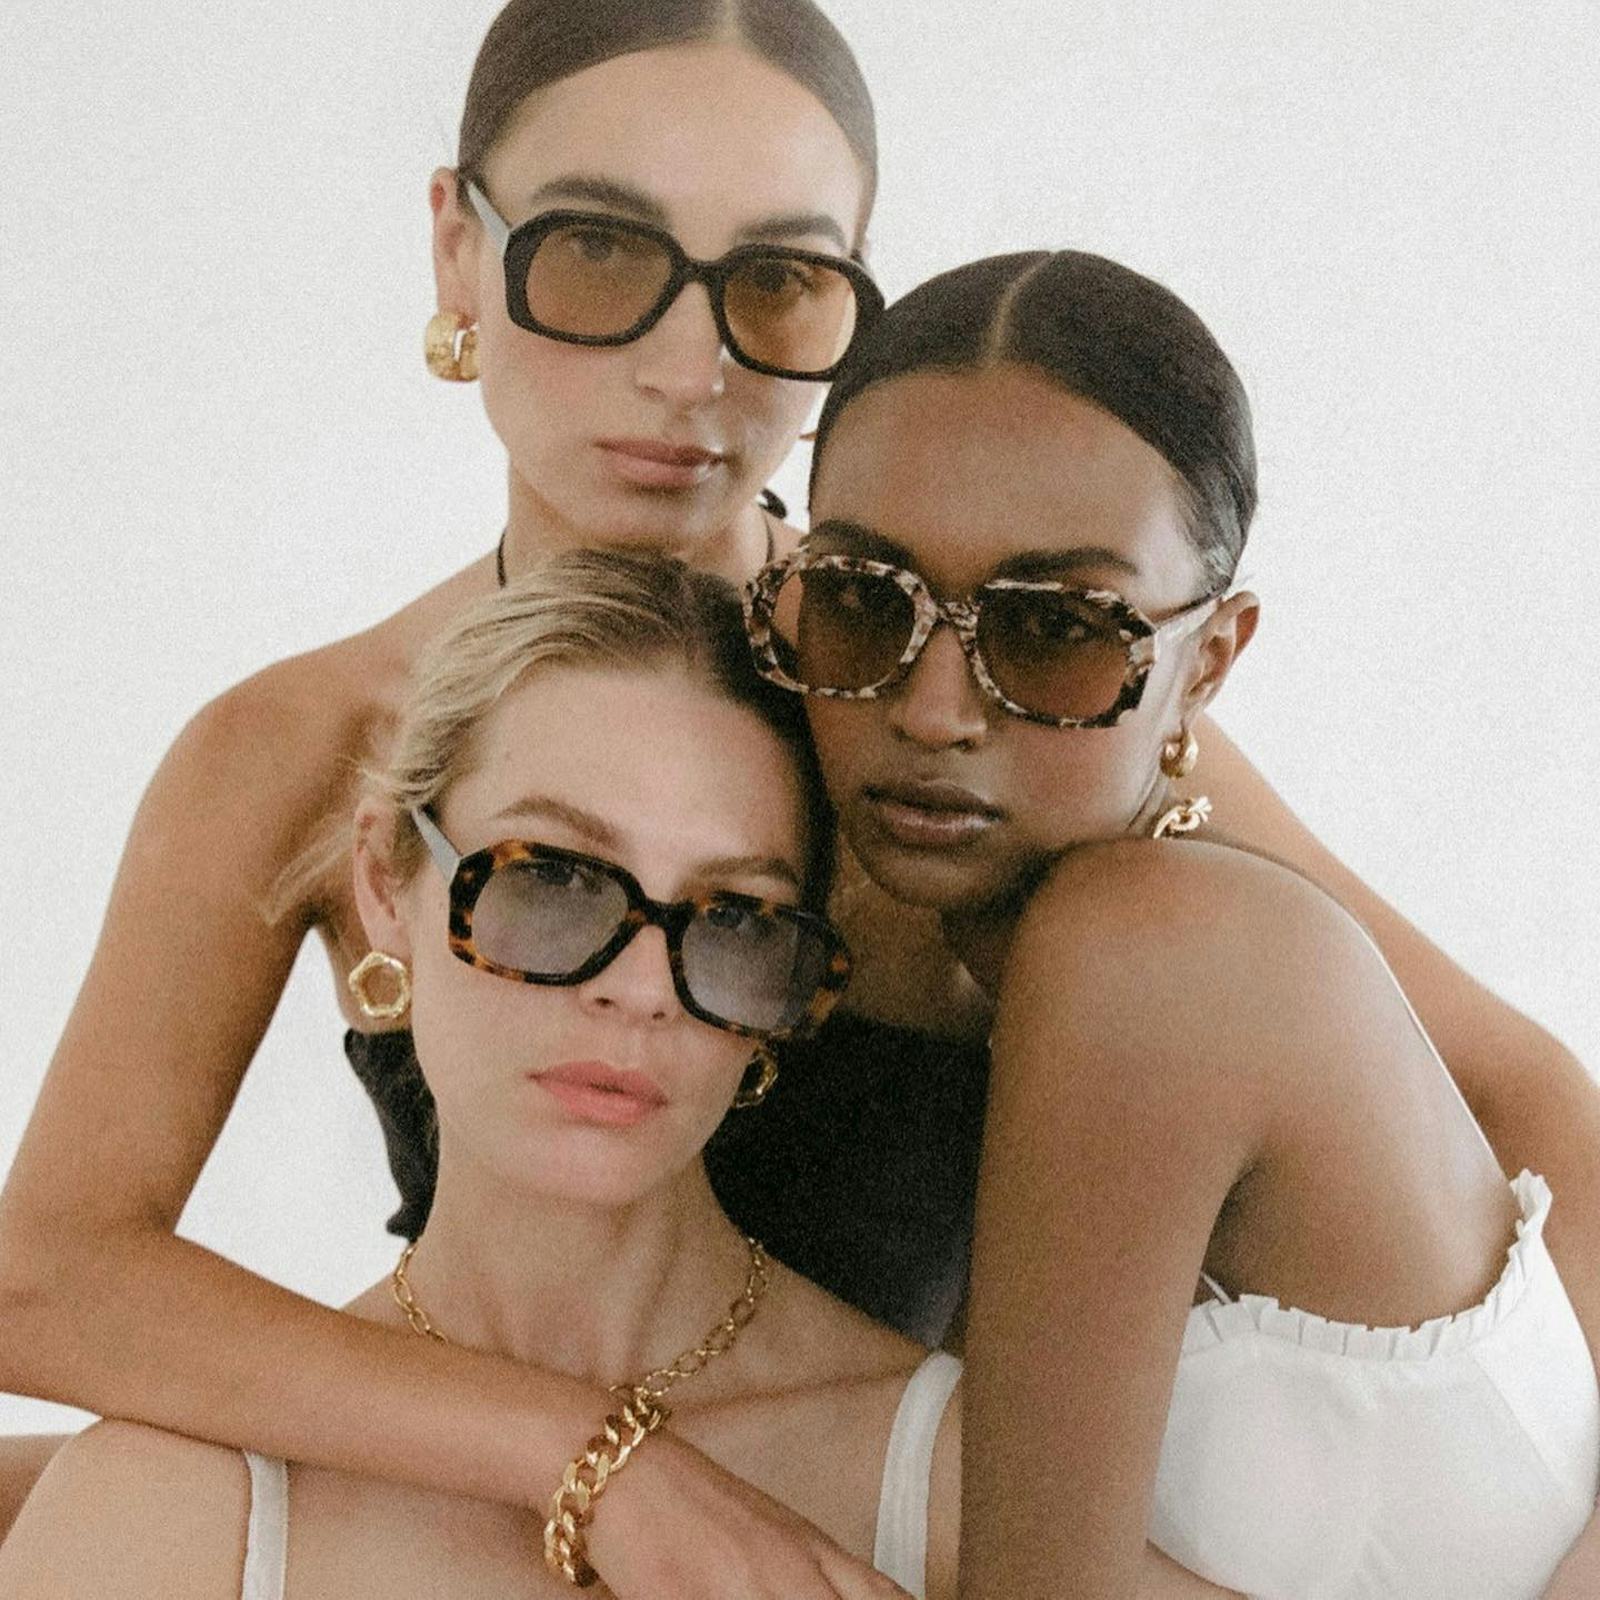 The Geek-Chic Sunglasses Trend Taking Over in 2022